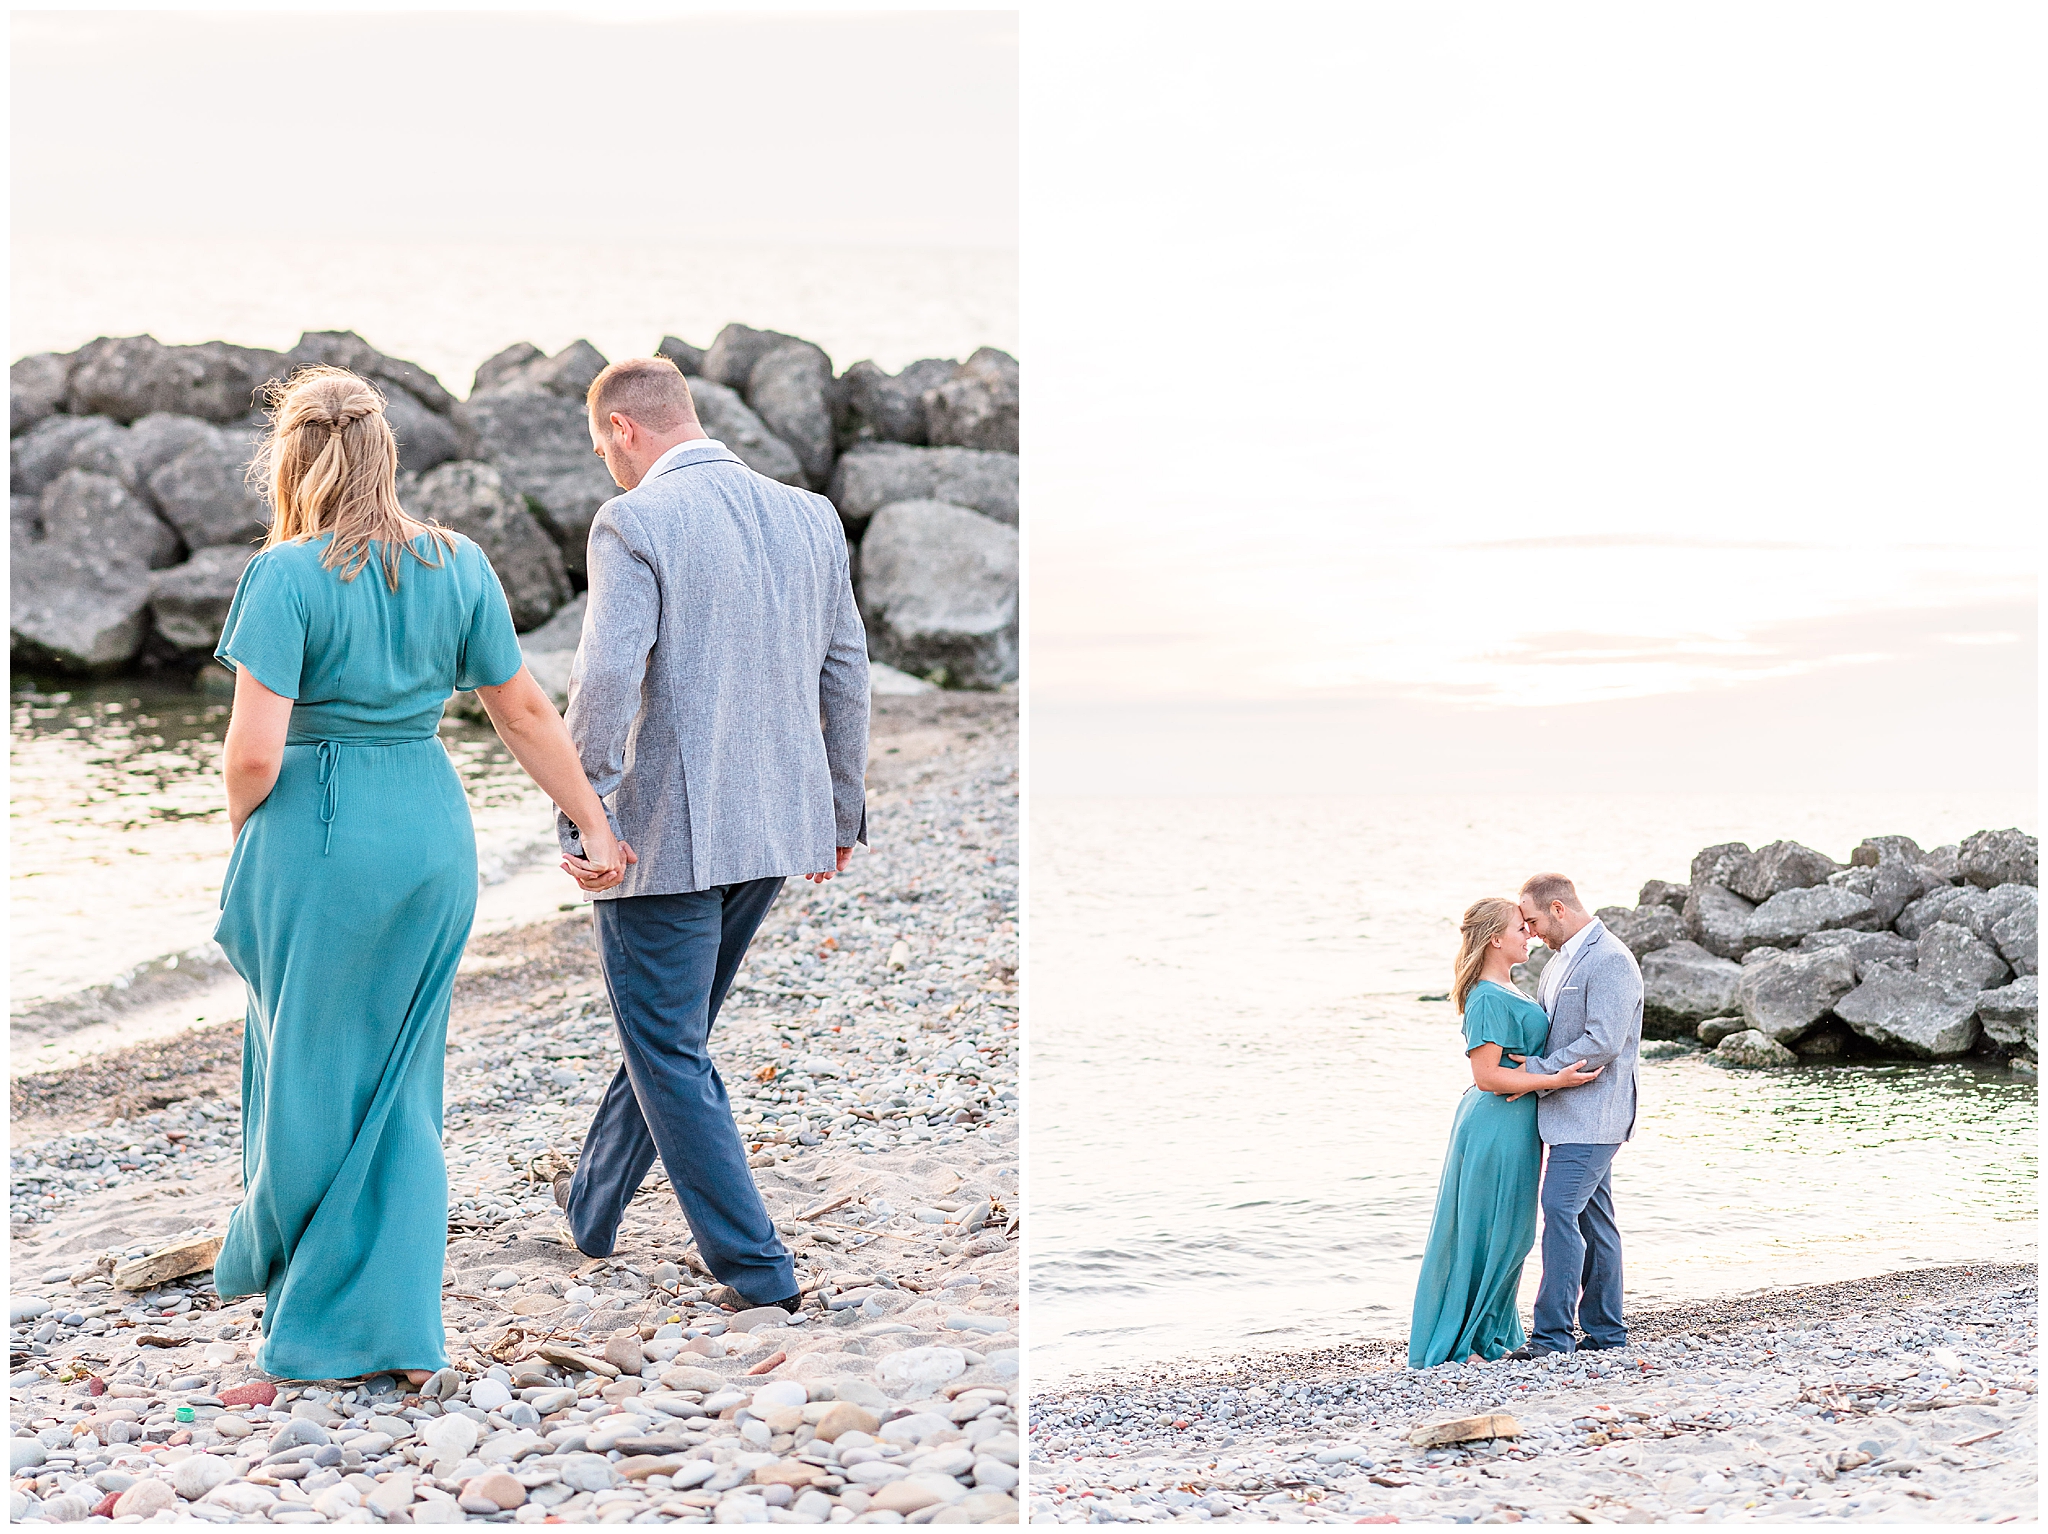 Romantic formal engagement portraits at Sims Park beach in Cleveland Ohio. Woman is wearing a long formal teal gown with flowing sleeves. The man is in a grey suit and white button up shirt. Walking hand in hand towards the sunset in the golden light. 